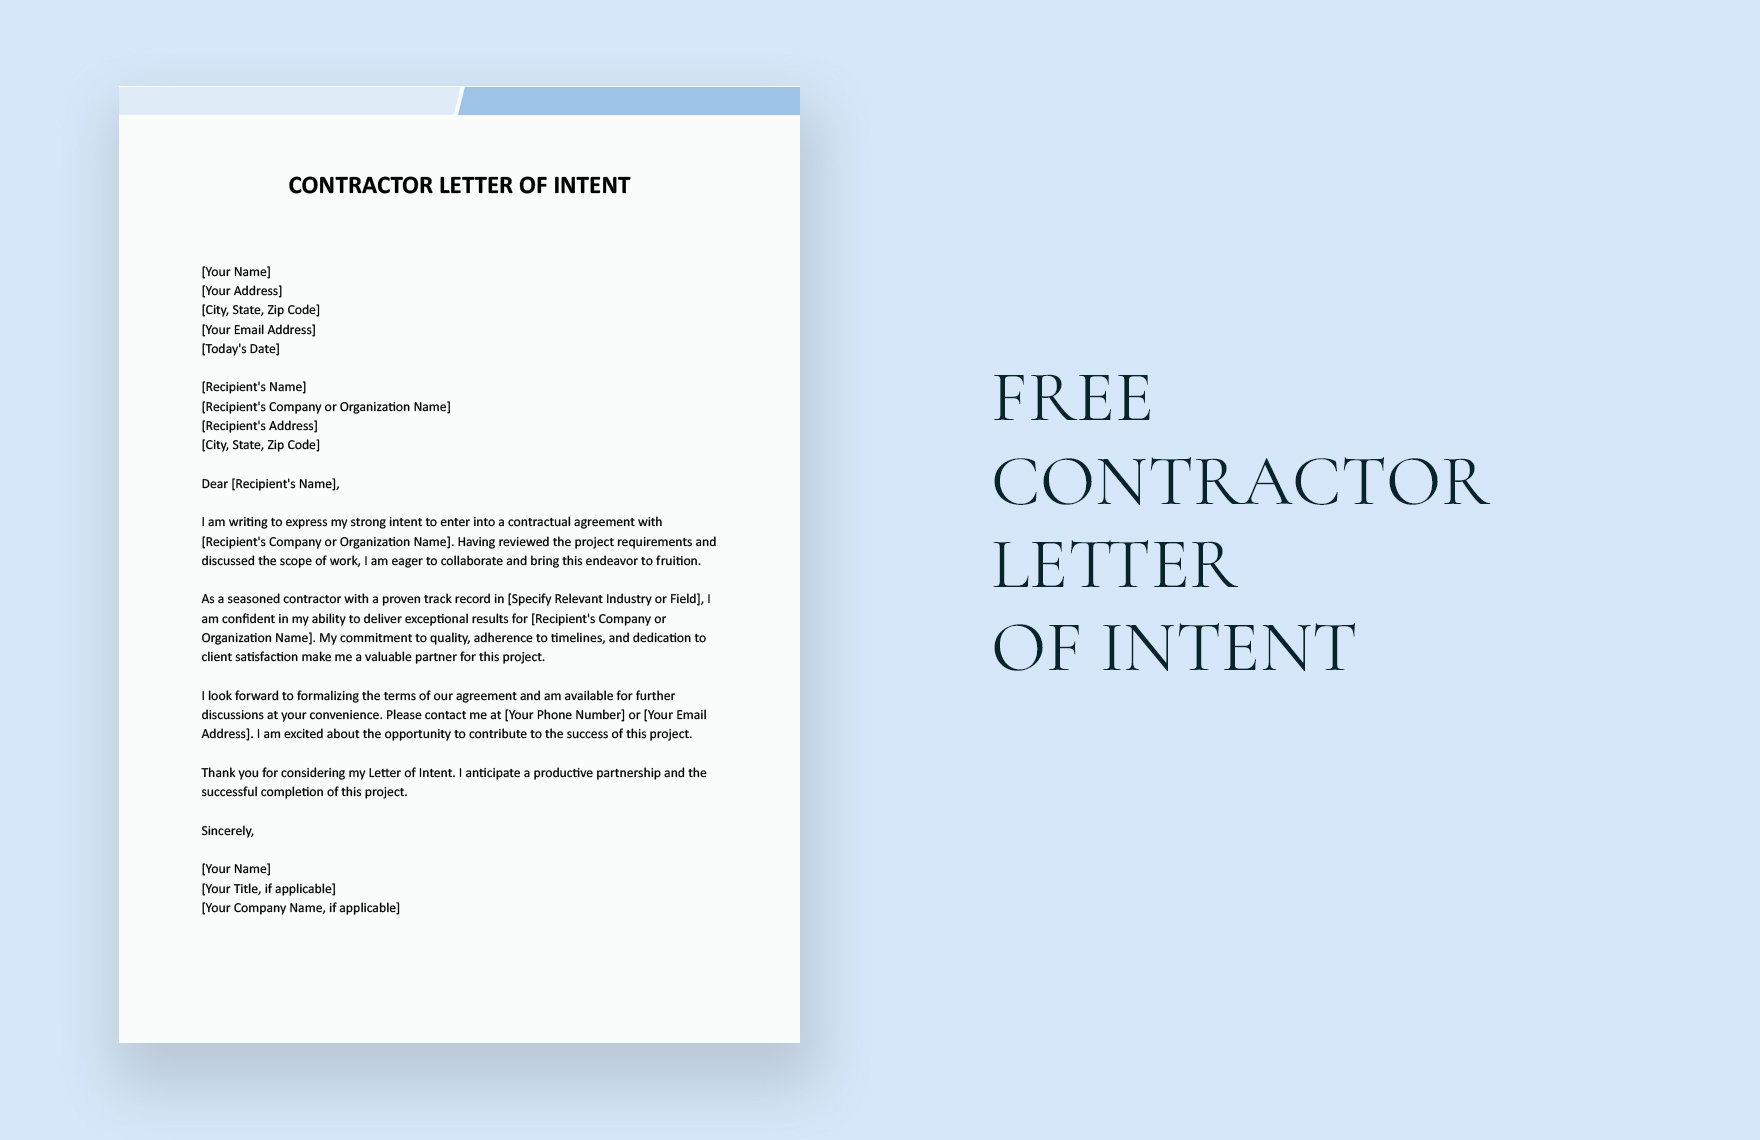 Contractor Letter of Intent in Word, Google Docs